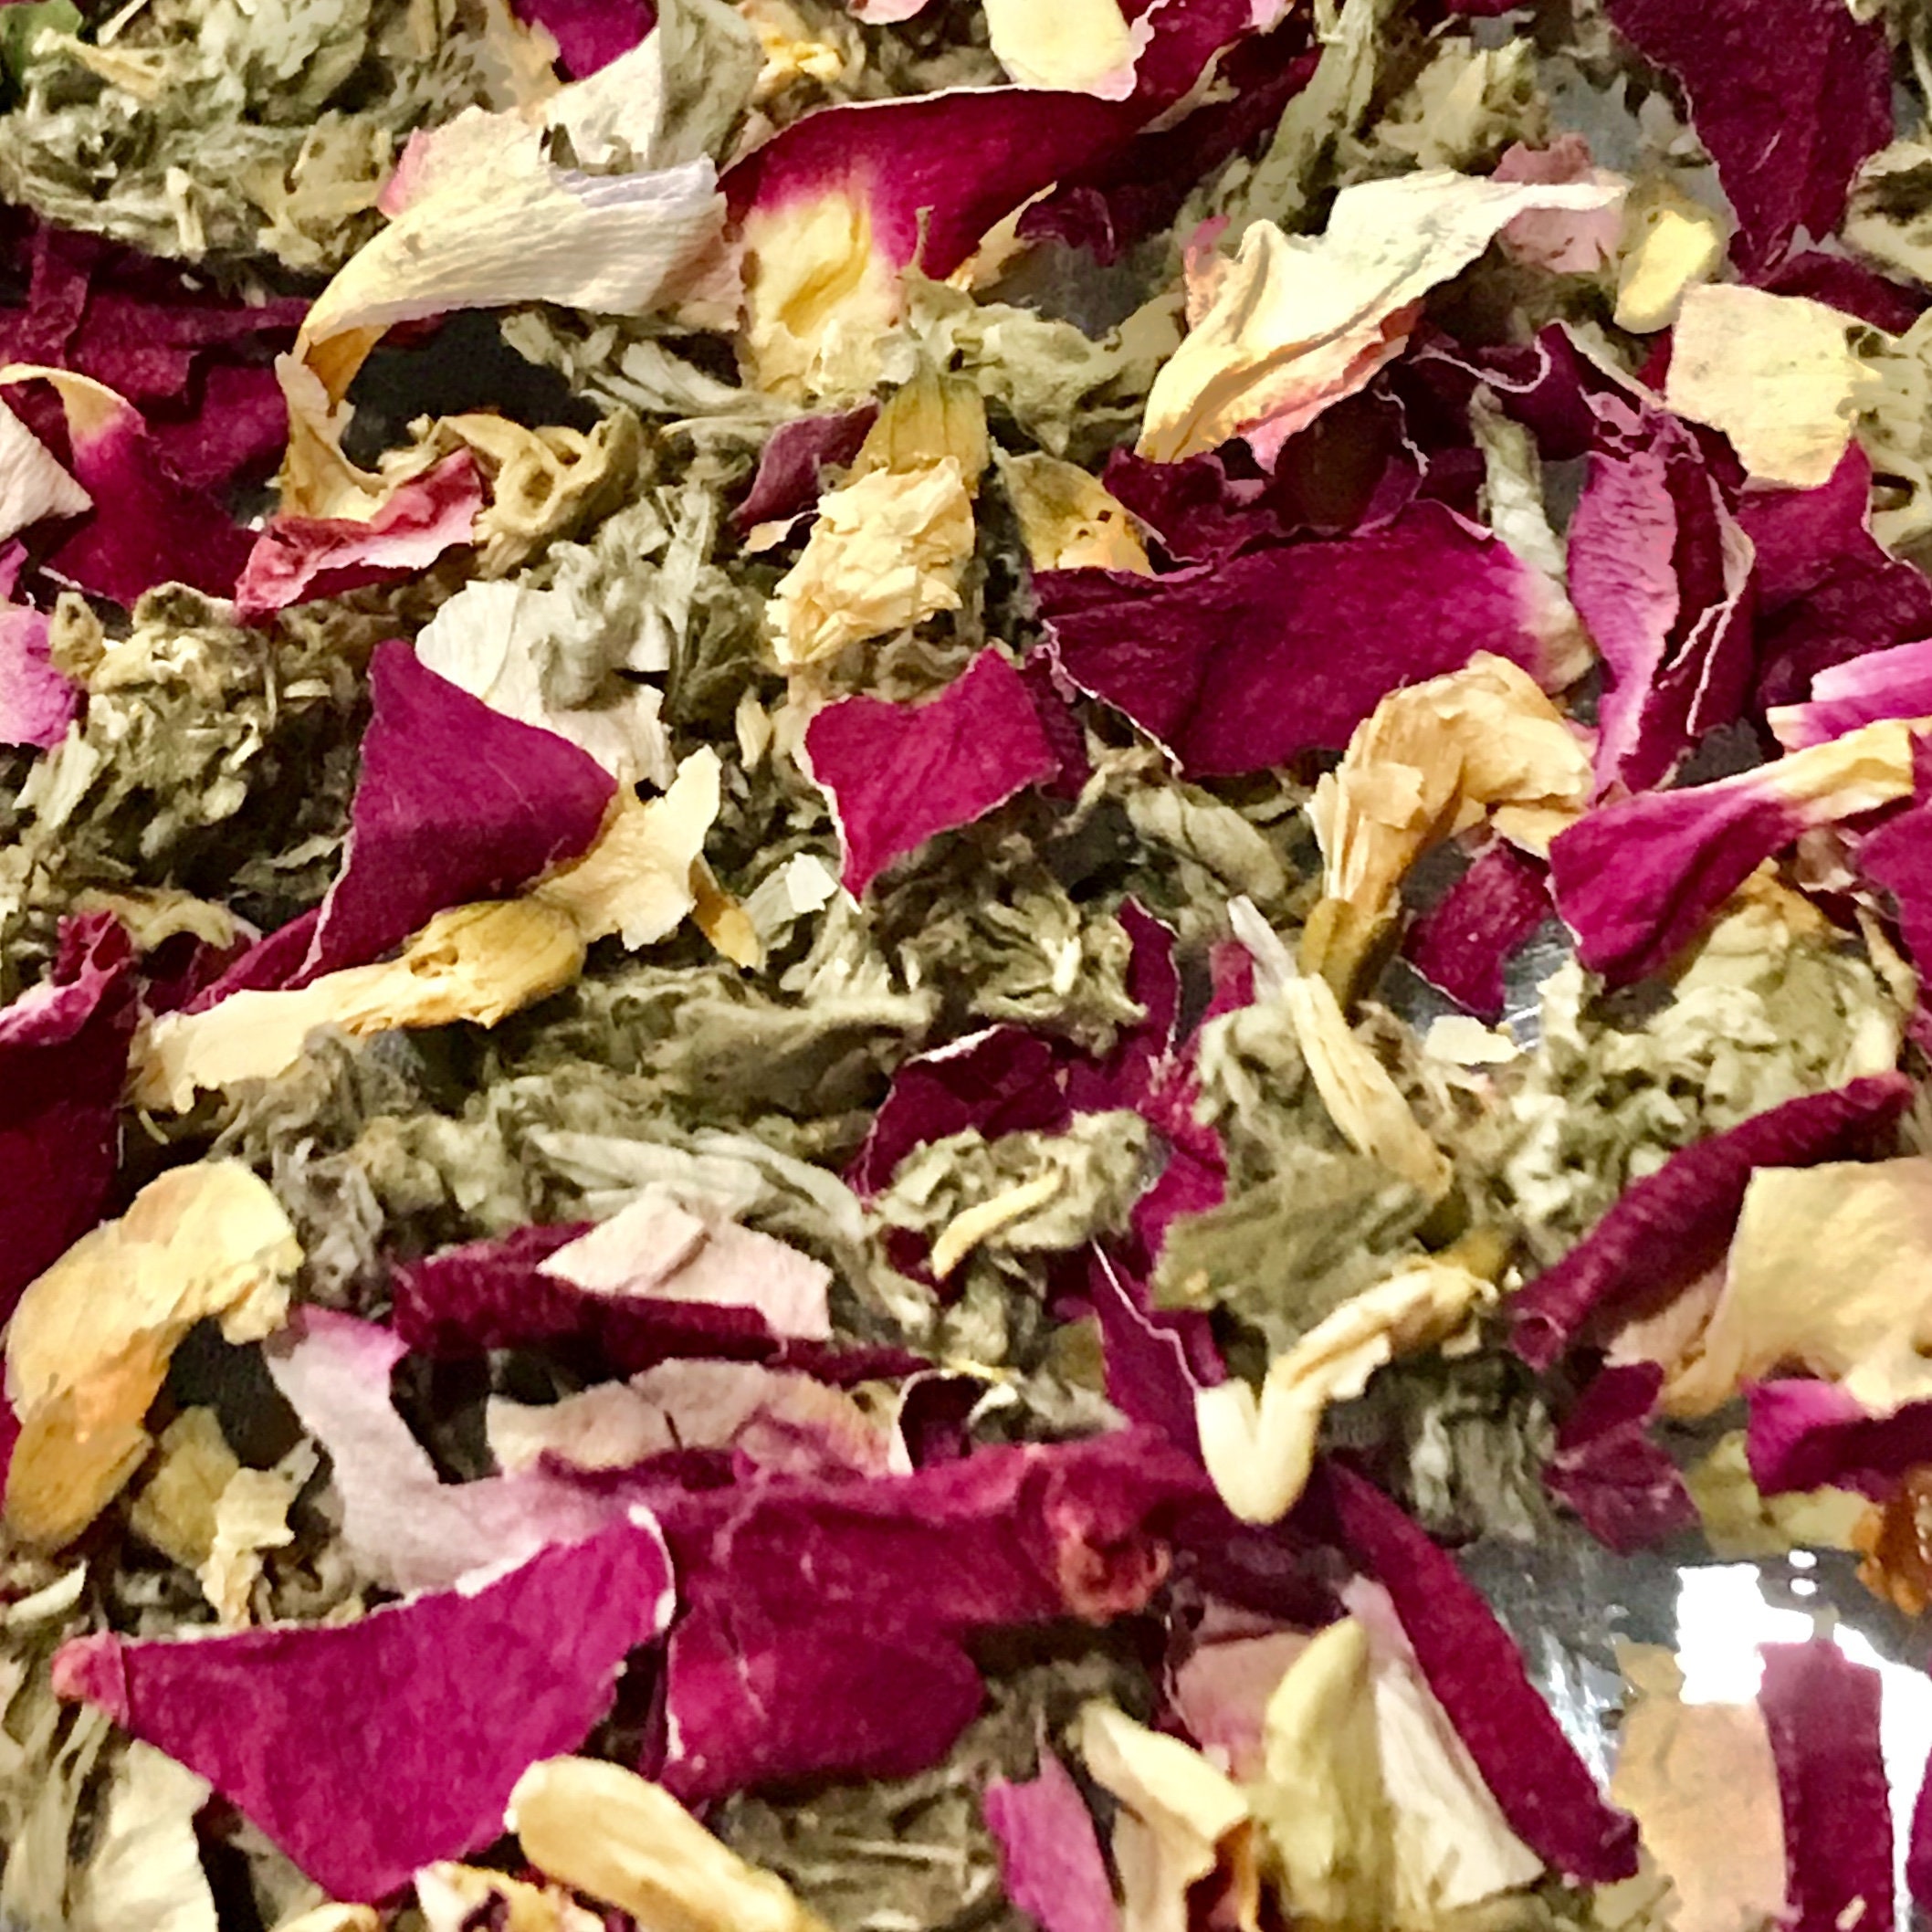 Herbal Burning Blends For Ritual Spell Casting & Smudge Cleansing. Rose Petal, Wormwood Sophora Flower